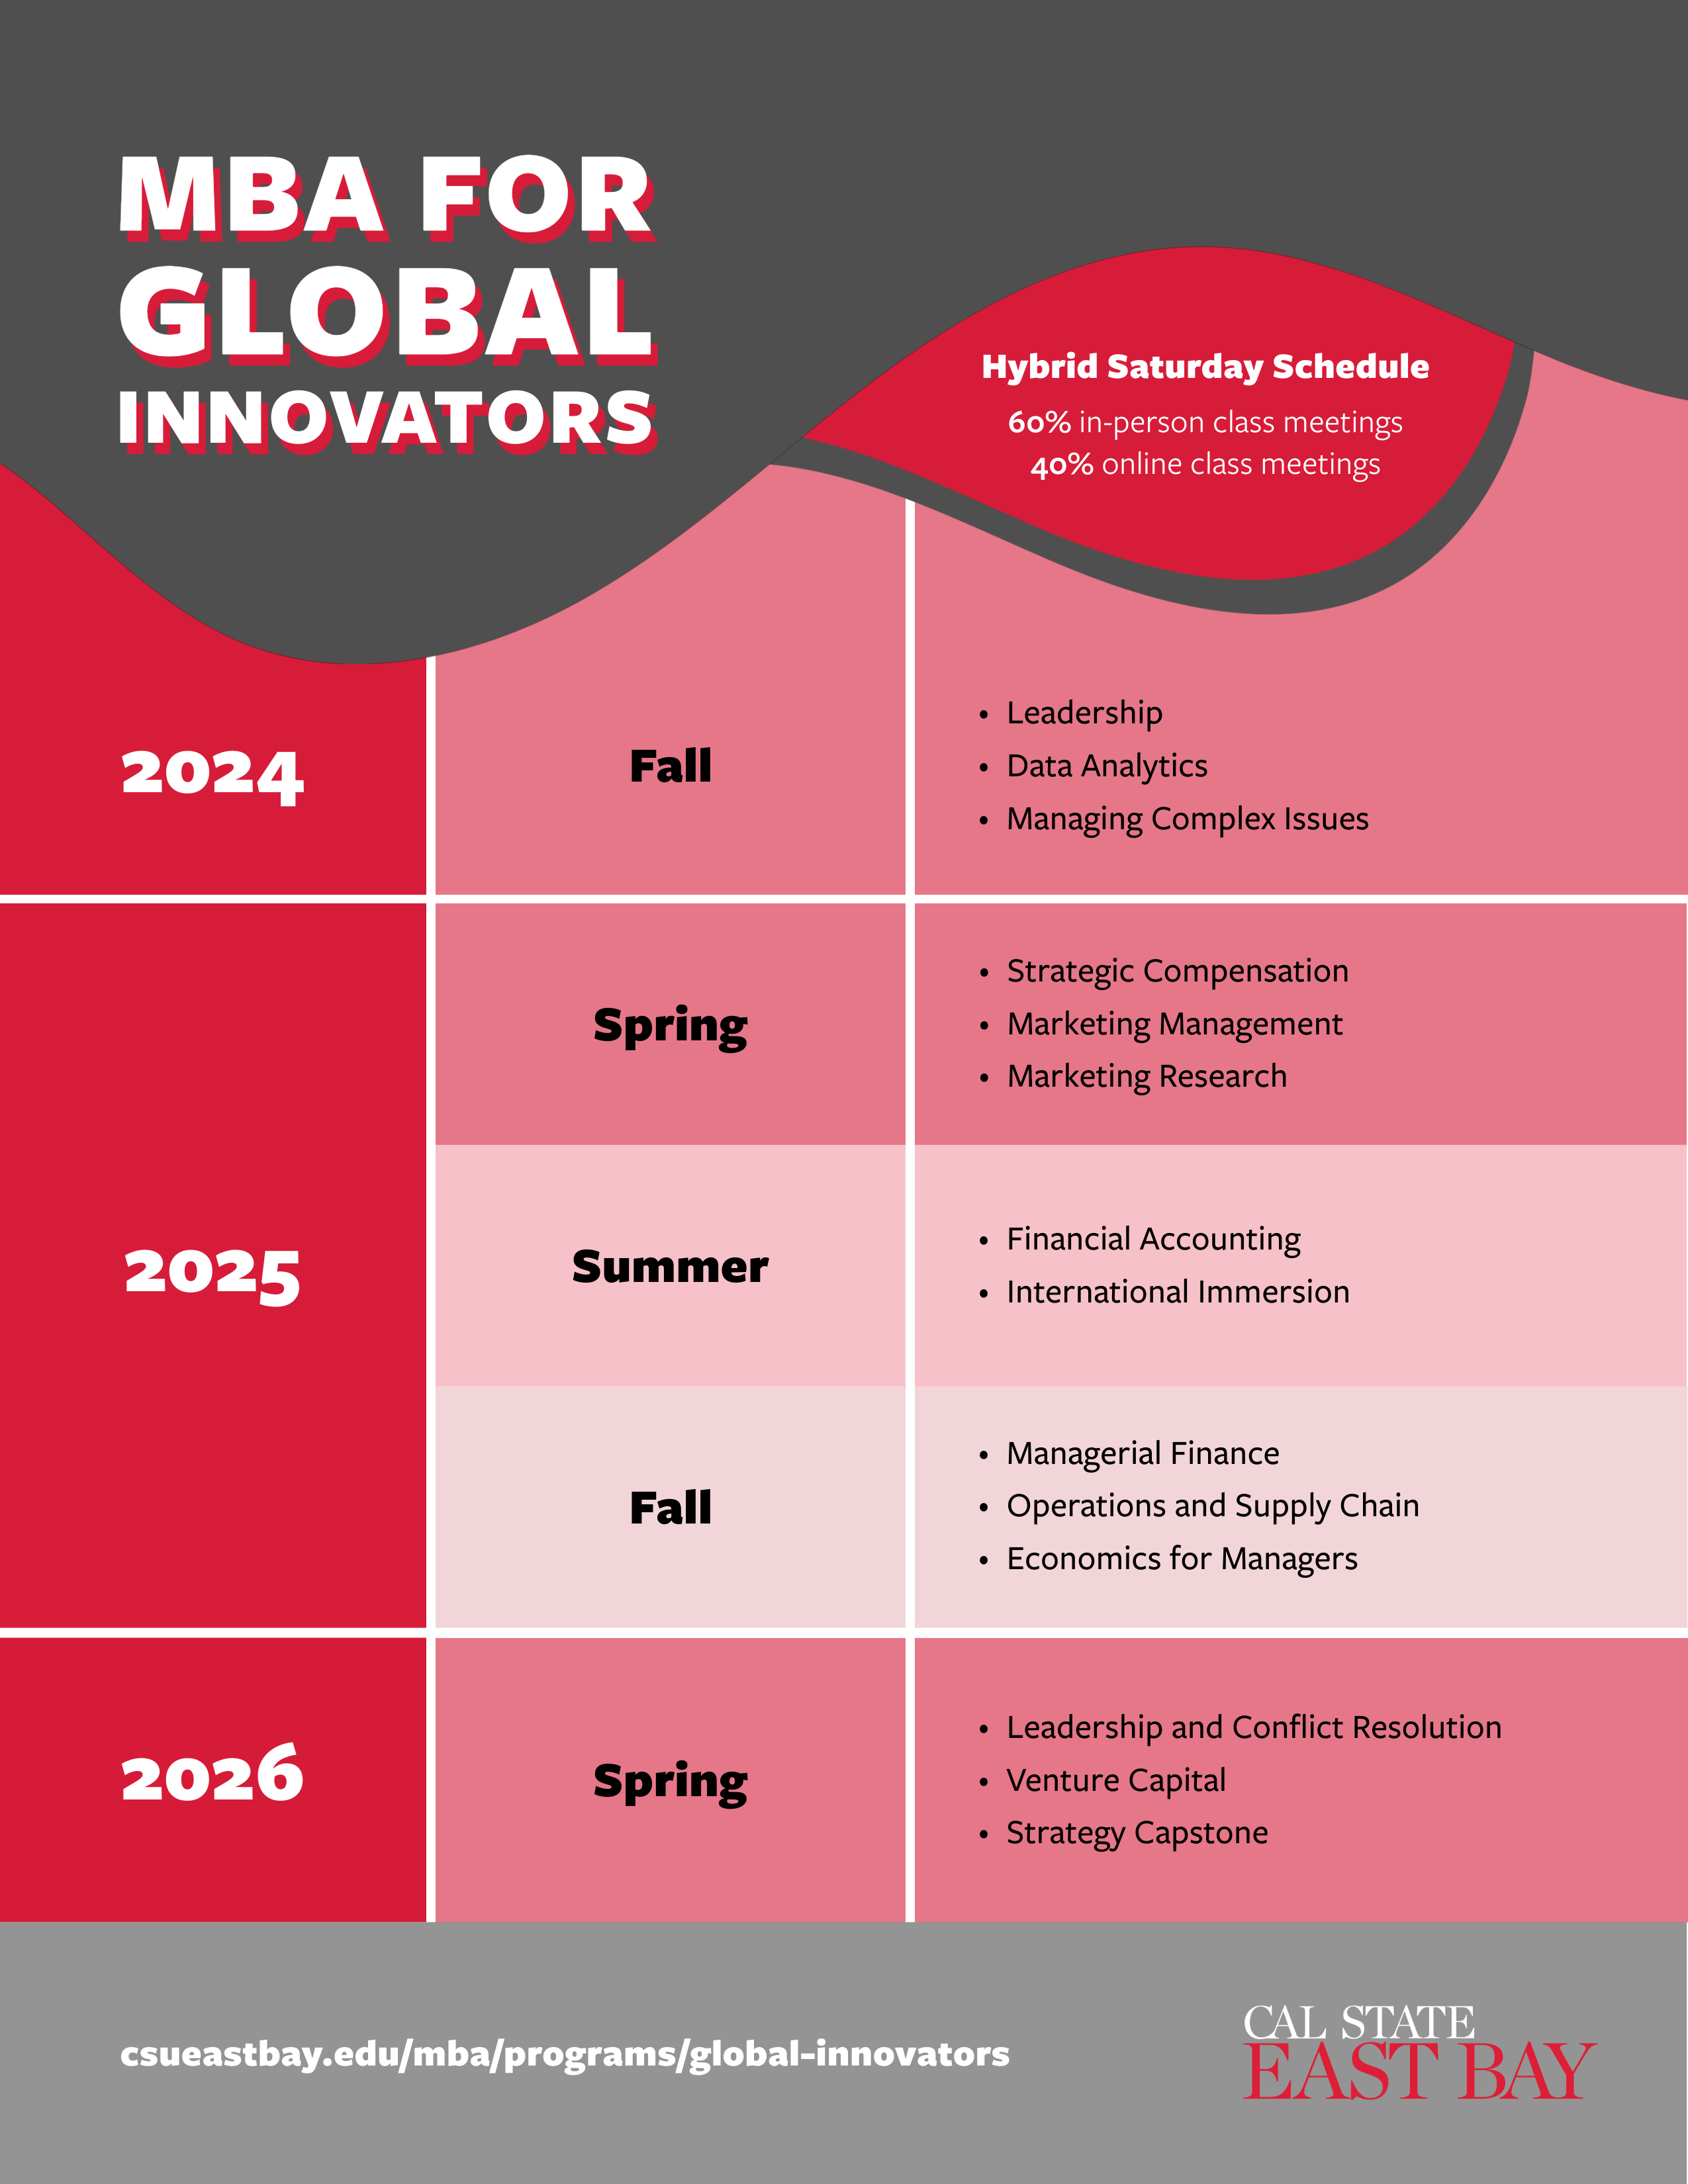 Sample of courses from Fall 2024 to Spring 2026.